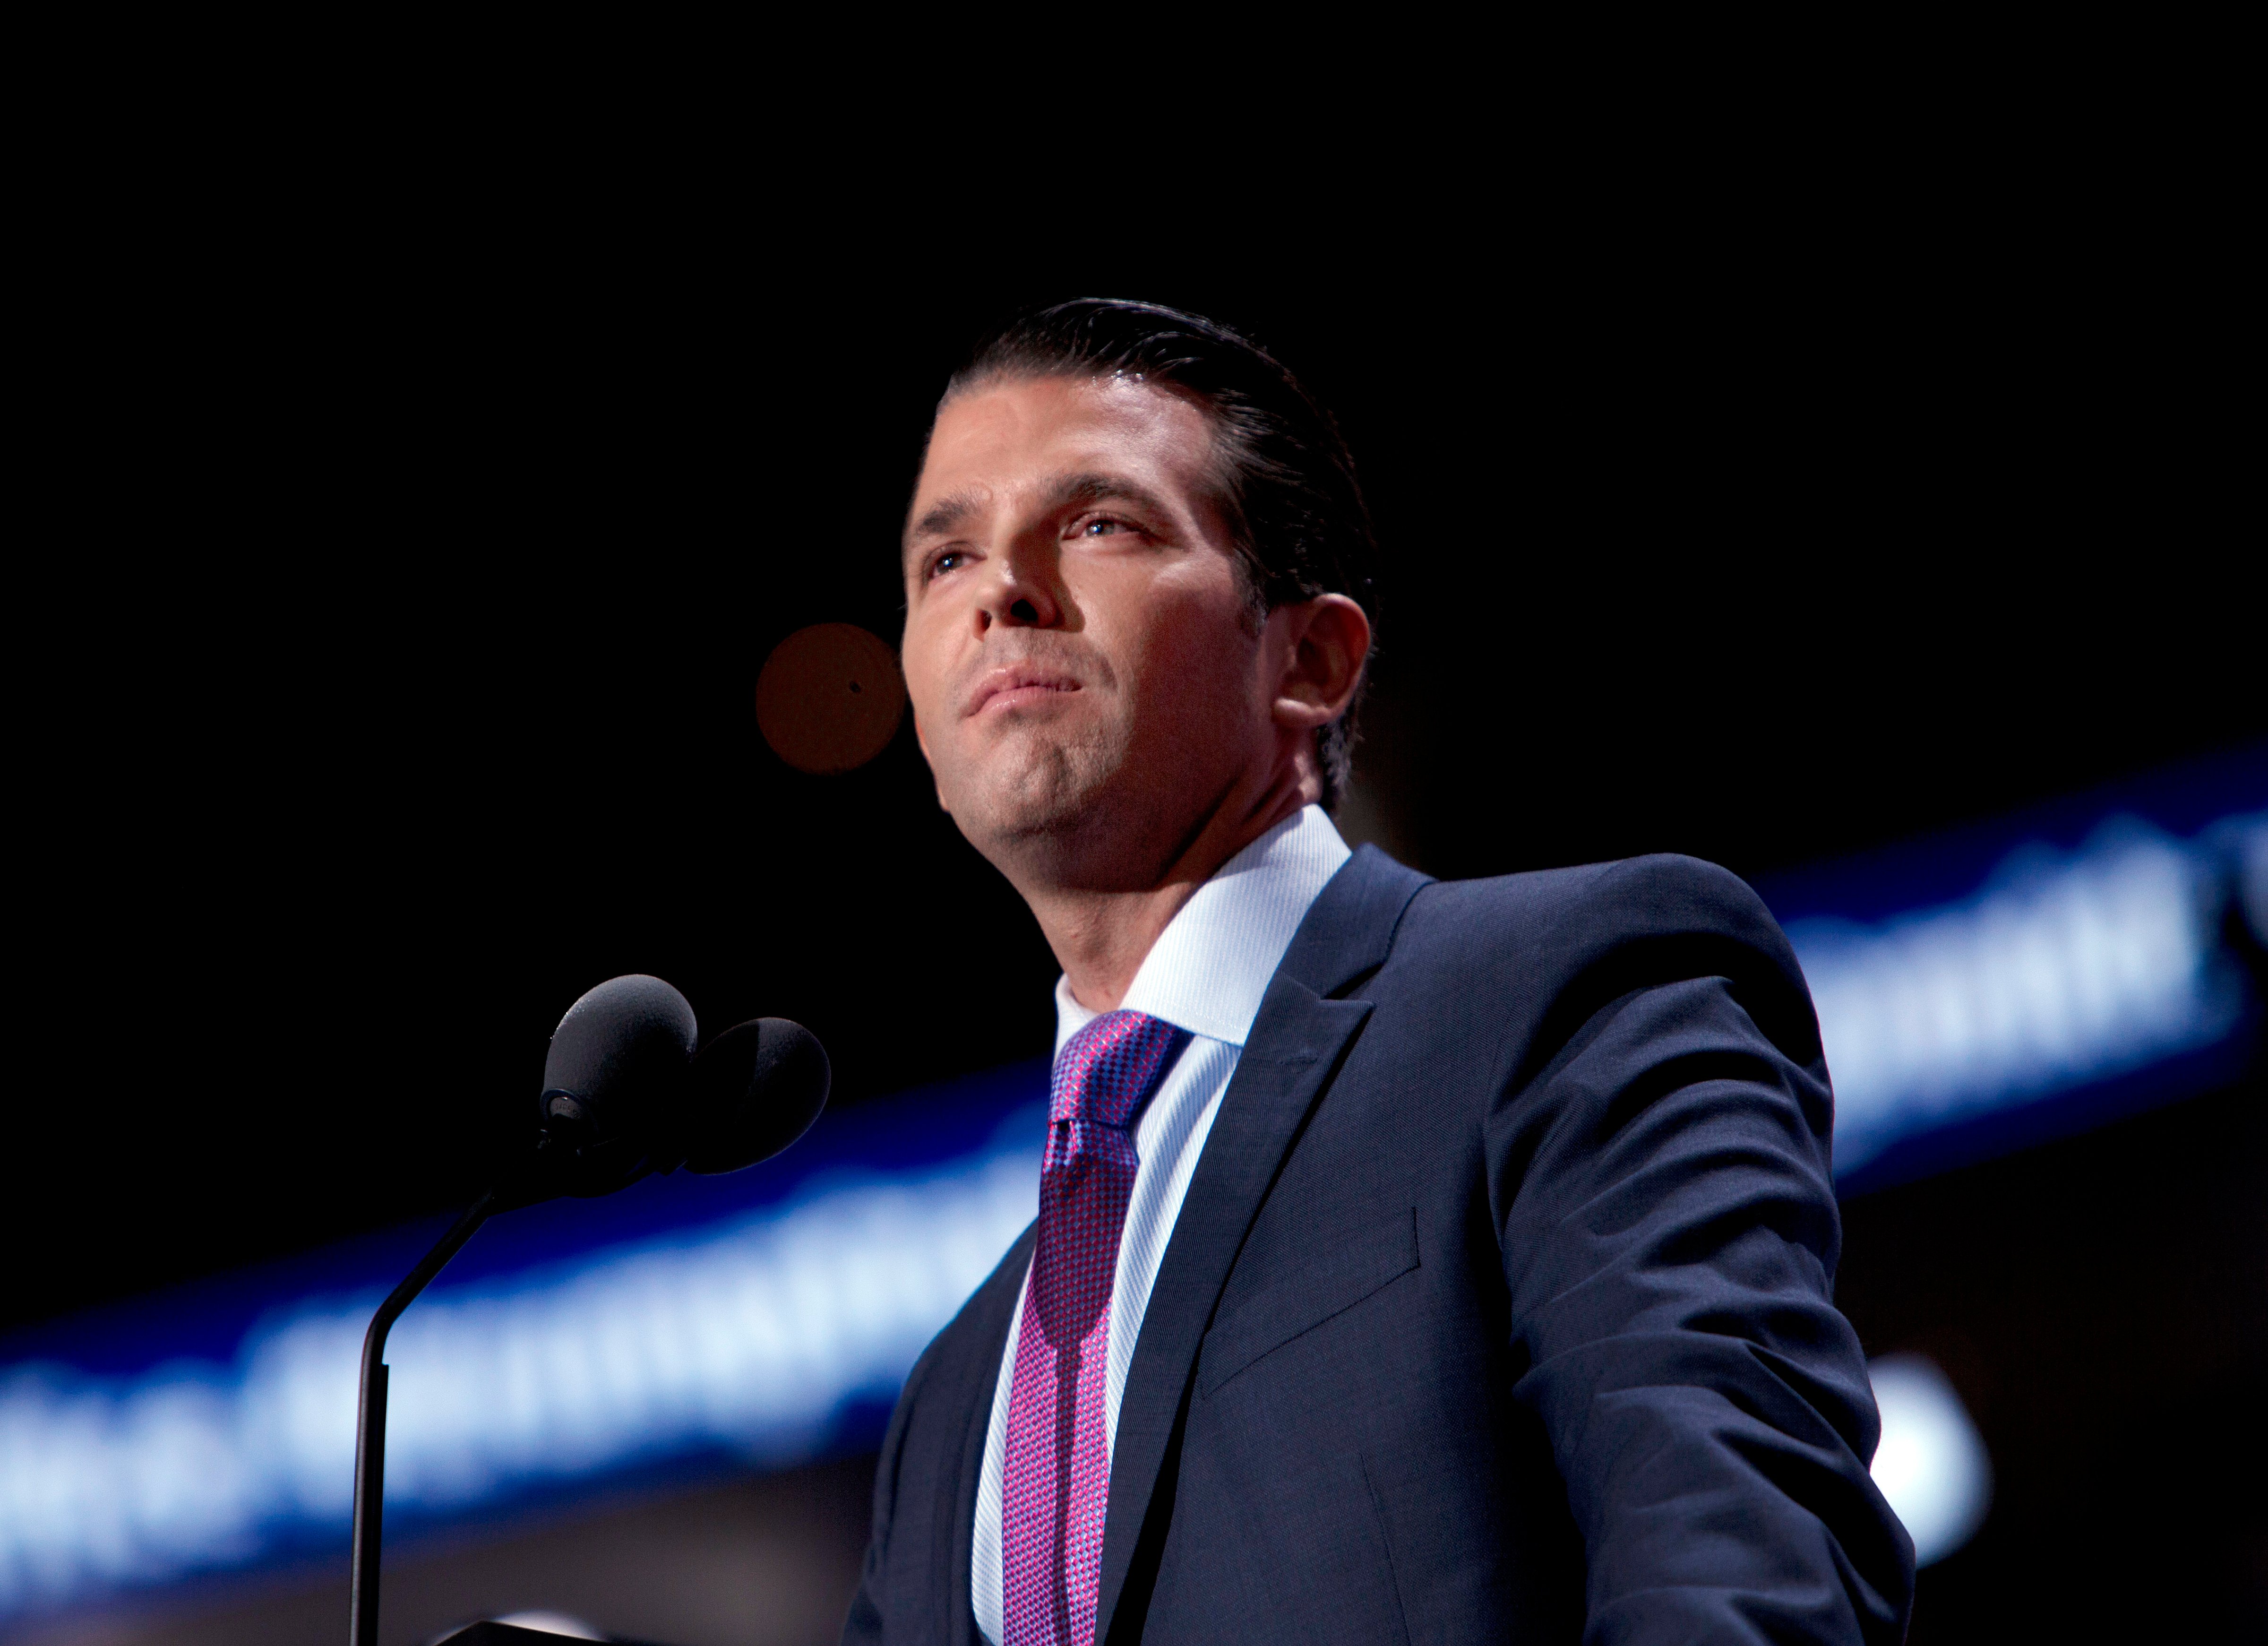 Donald Trump Jr. speaks at the Republican National Convention in Cleveland on Tuesday, July 19, 2016. (Christopher Morris—VII for TIME)